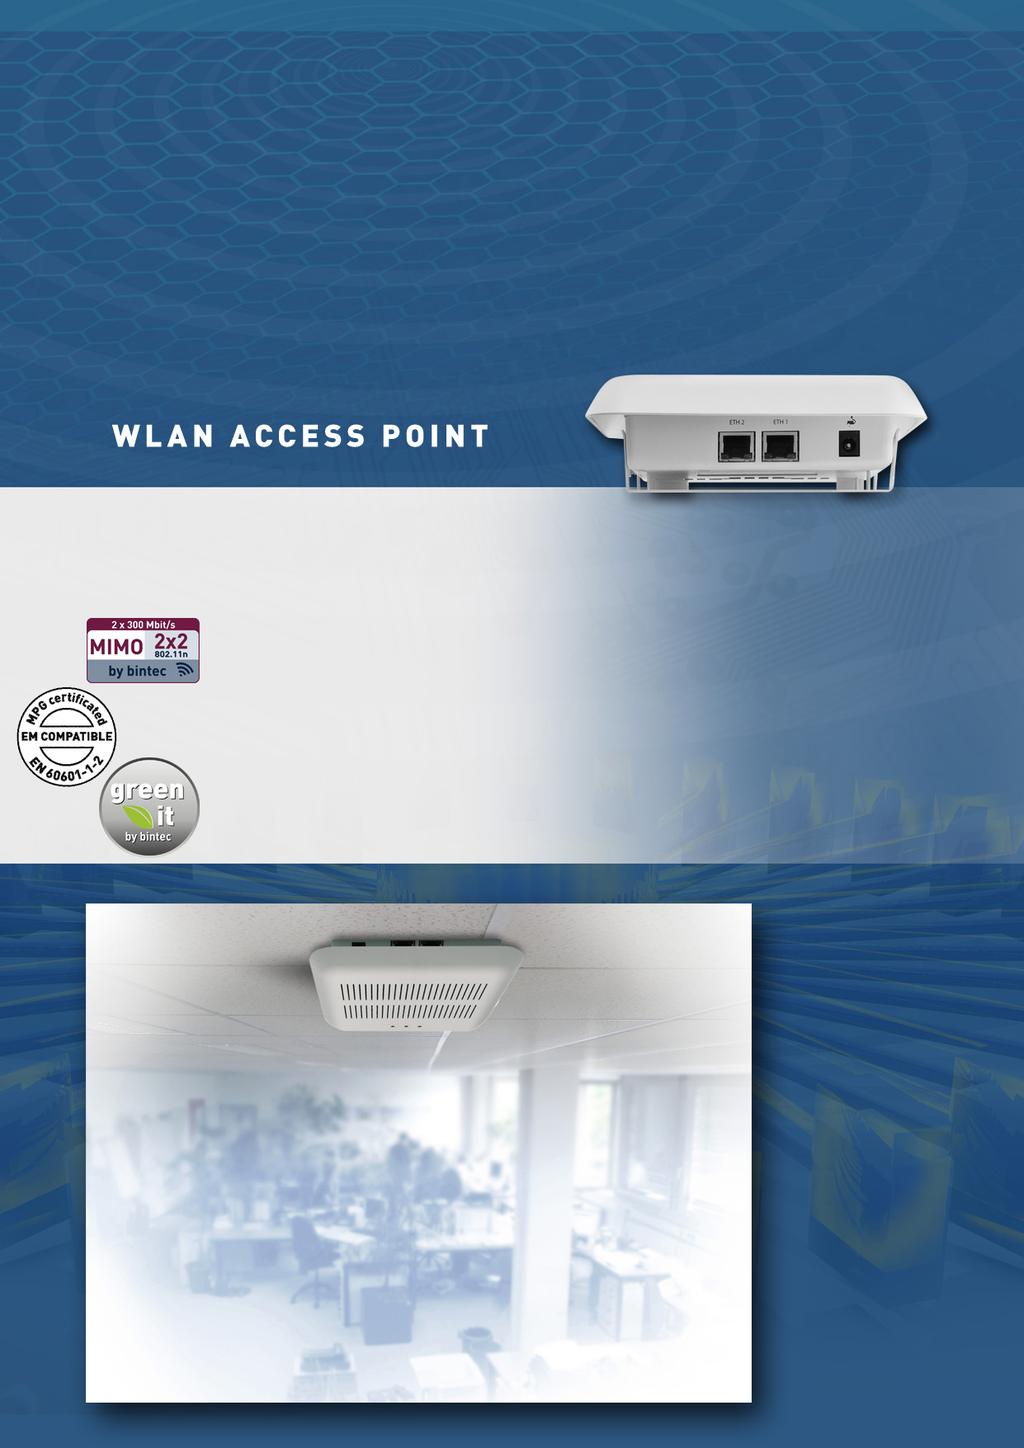 Business WLAN Access Point Dual concurrent radio for simultaneous 2.4/5 GHZ operation 802.